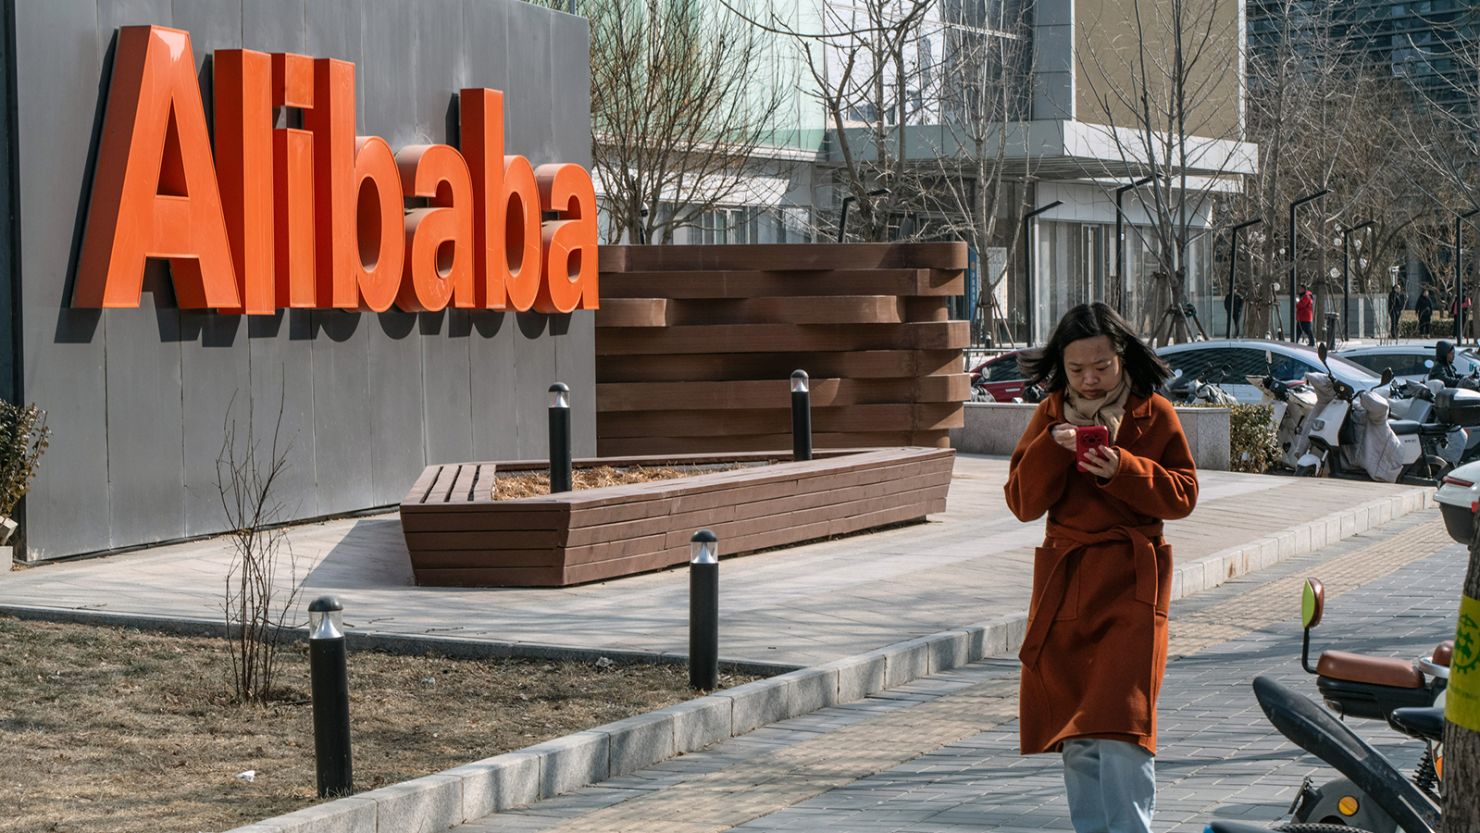 Alibaba has spent billions on buying back its shares.